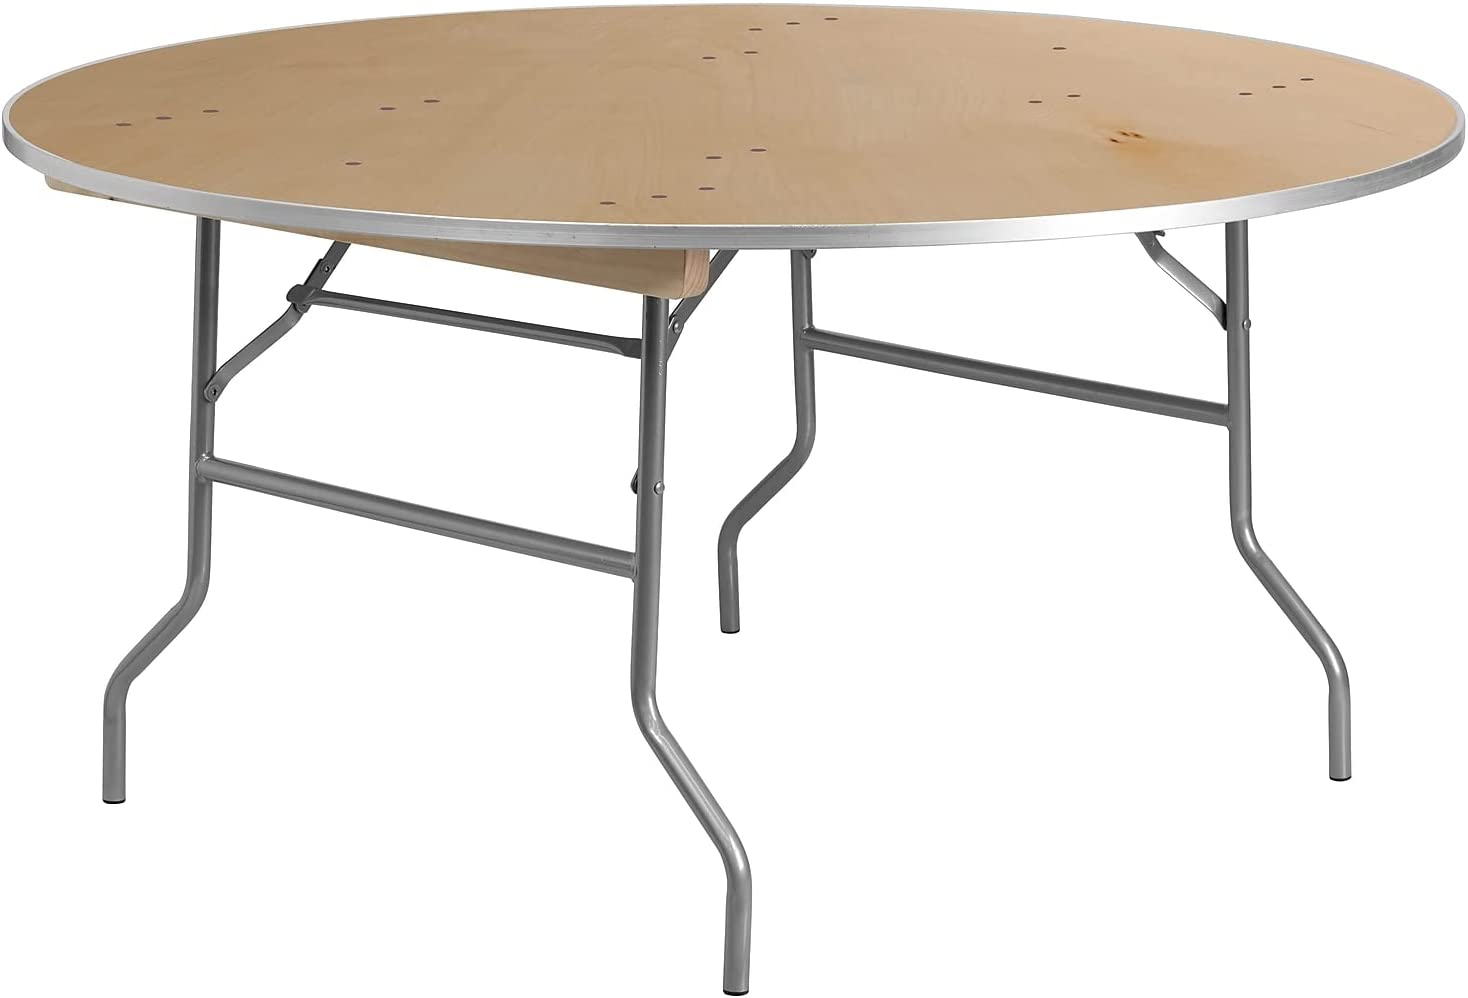 Flash Furniture 5-Foot Round HEAVY DUTY Birchwood Folding Banquet Table with METAL Edges